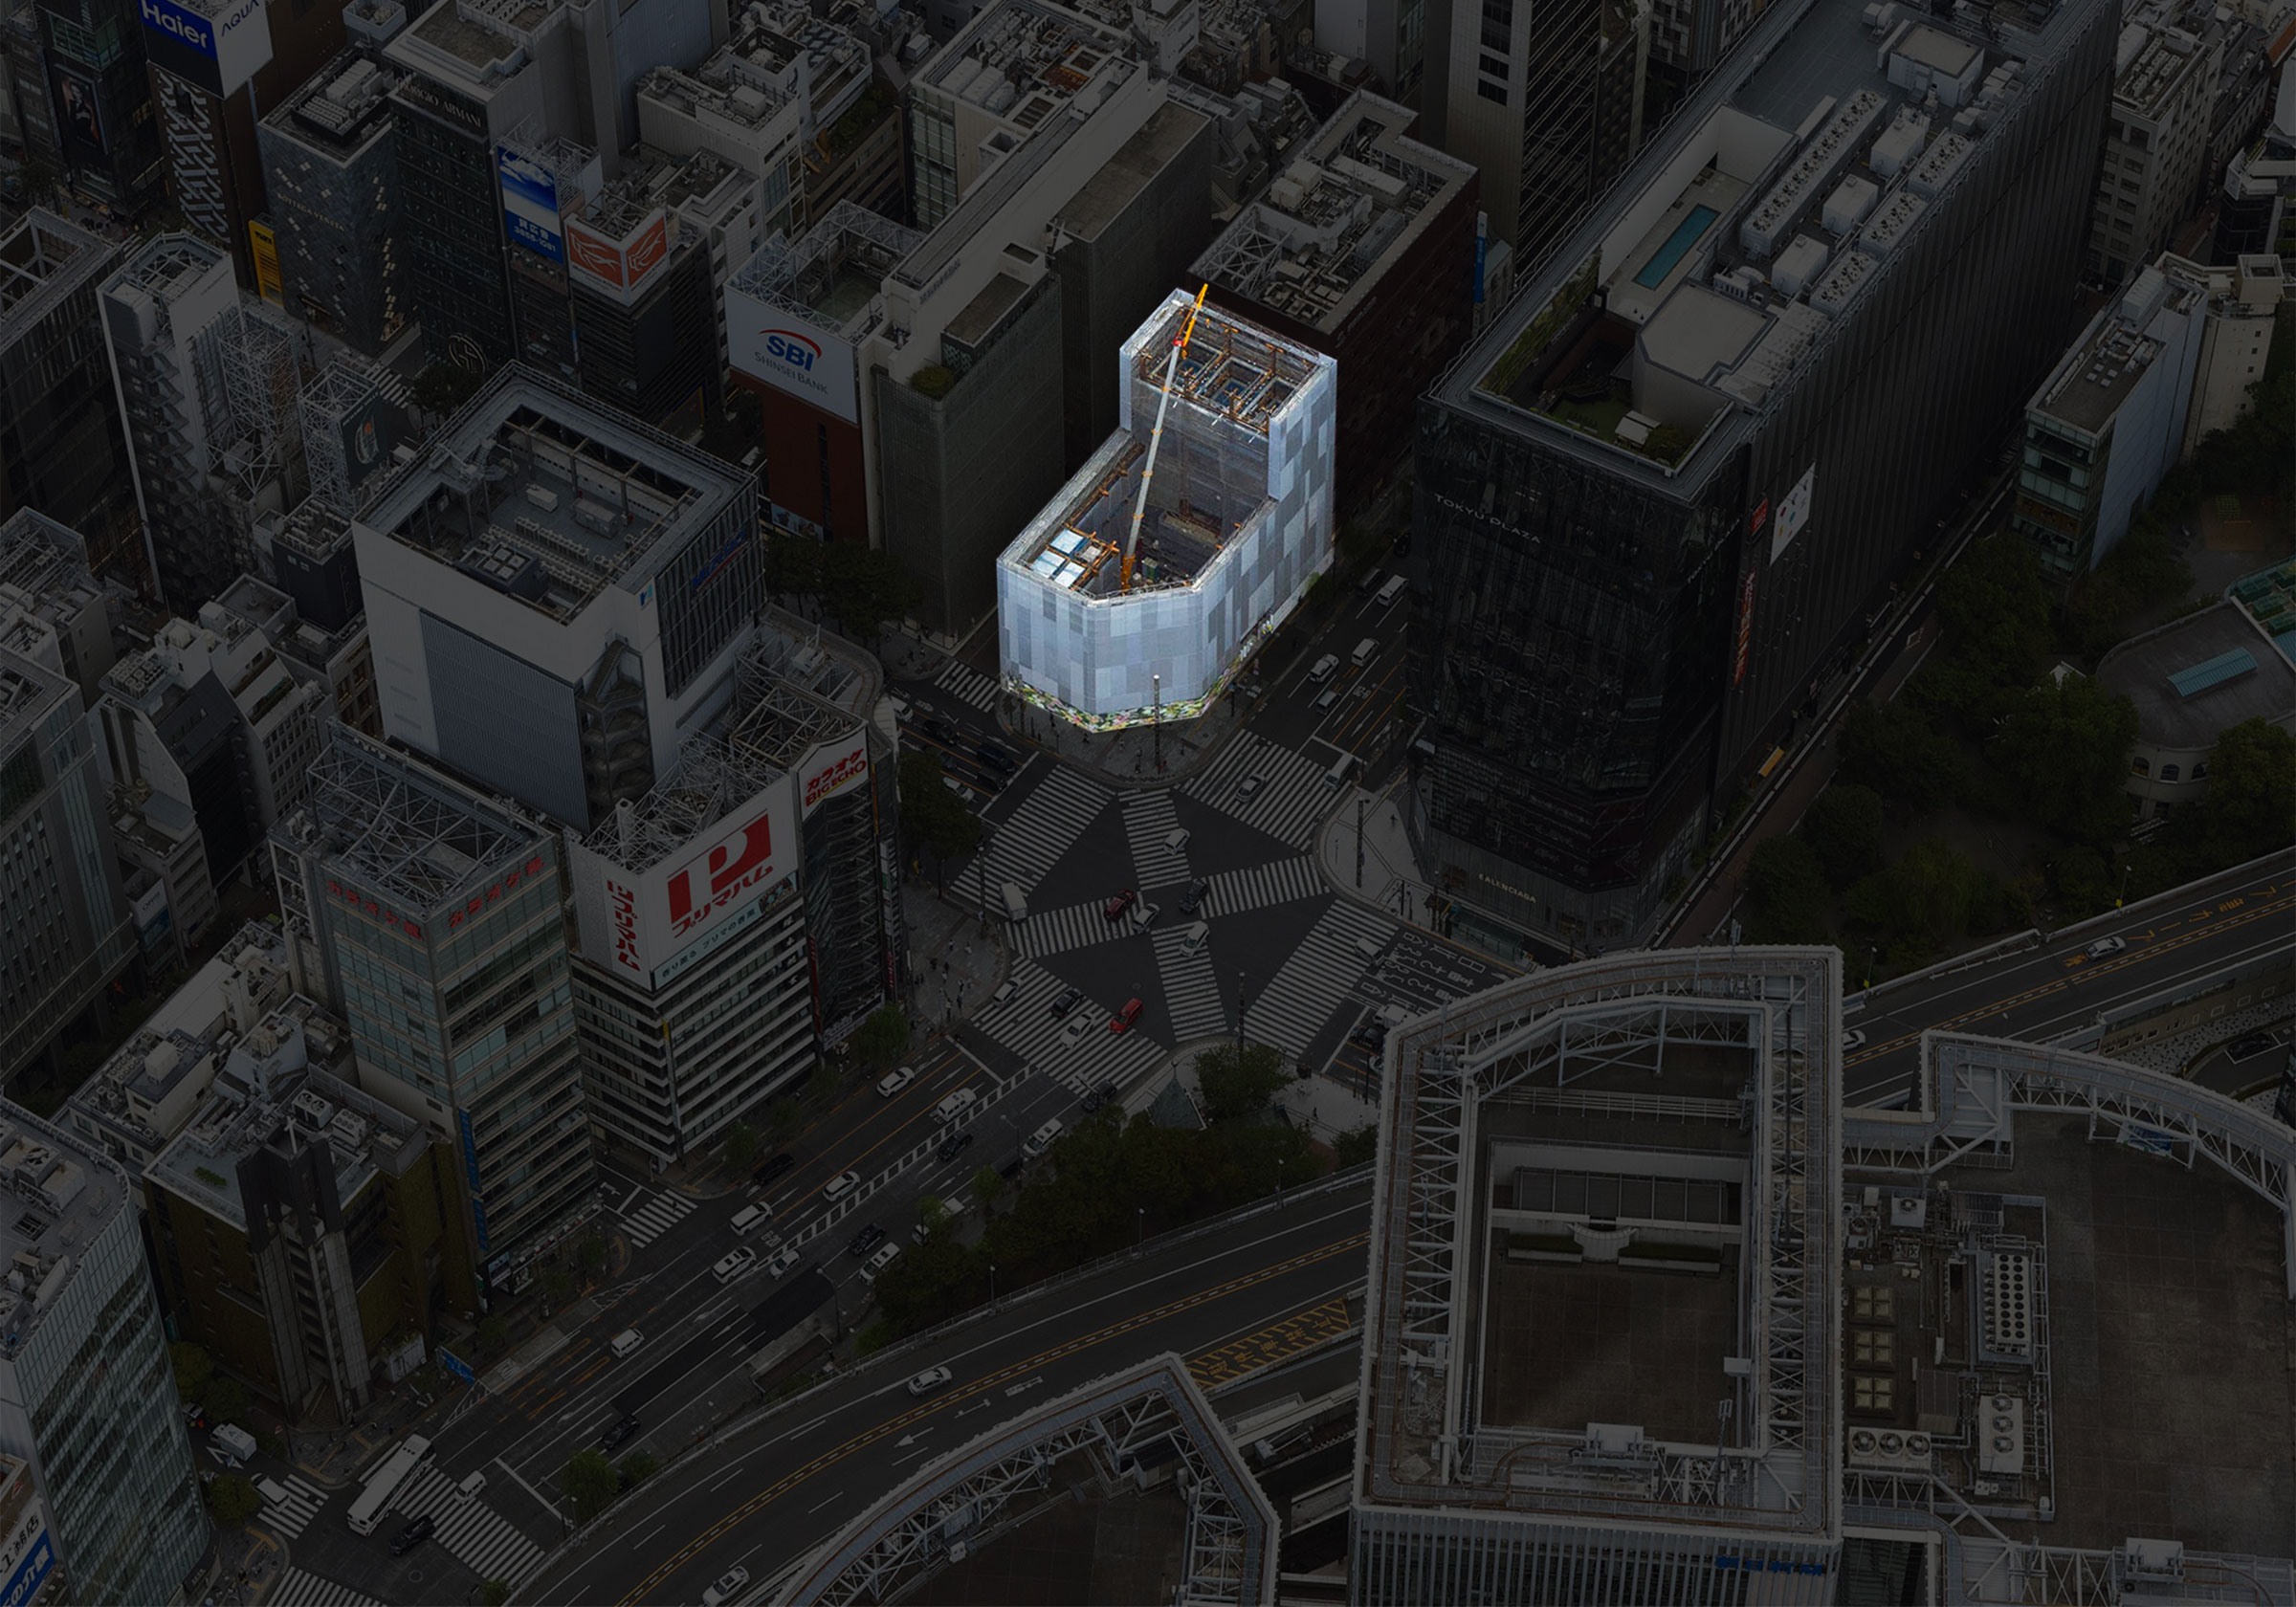 A photograph taken from overhead showing Ginza Sony Park under construction.